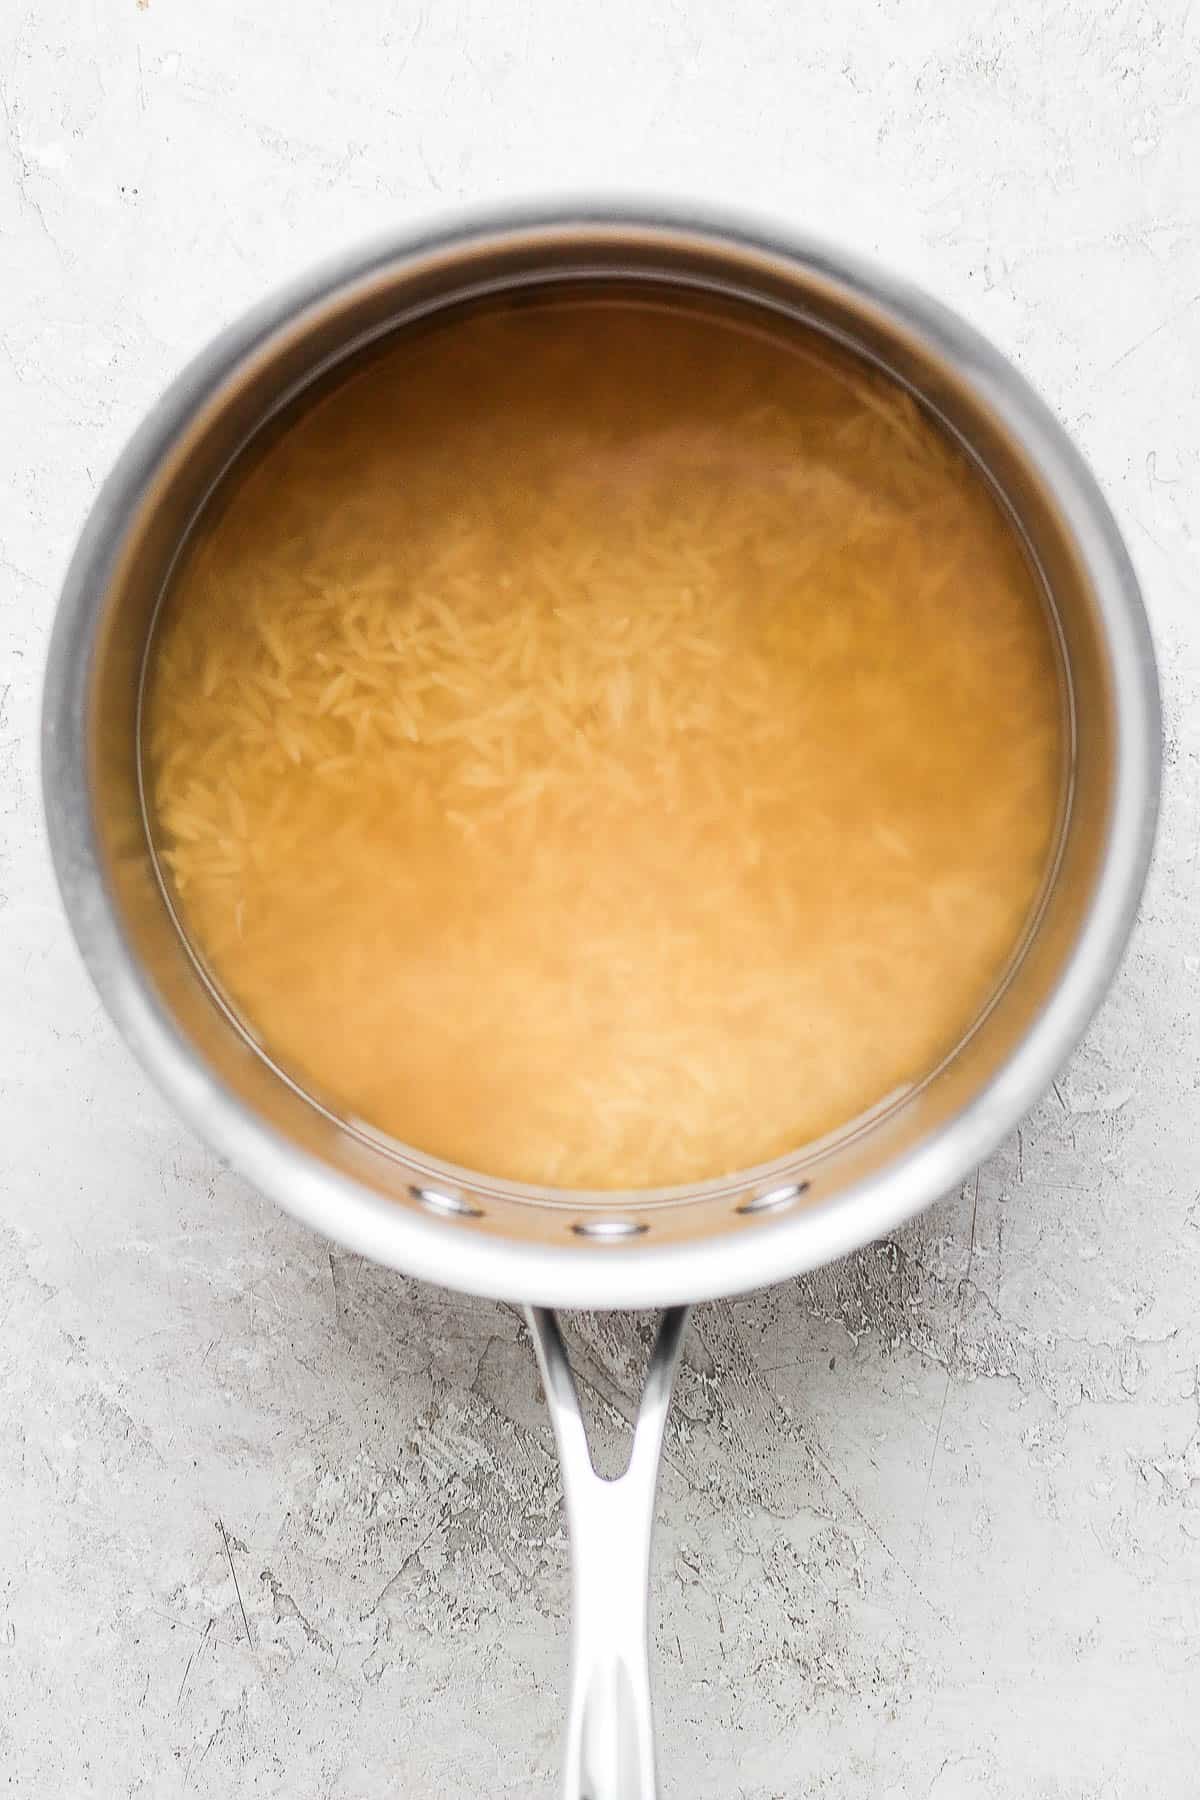 Orzo cooking in a pot with chicken broth and water.